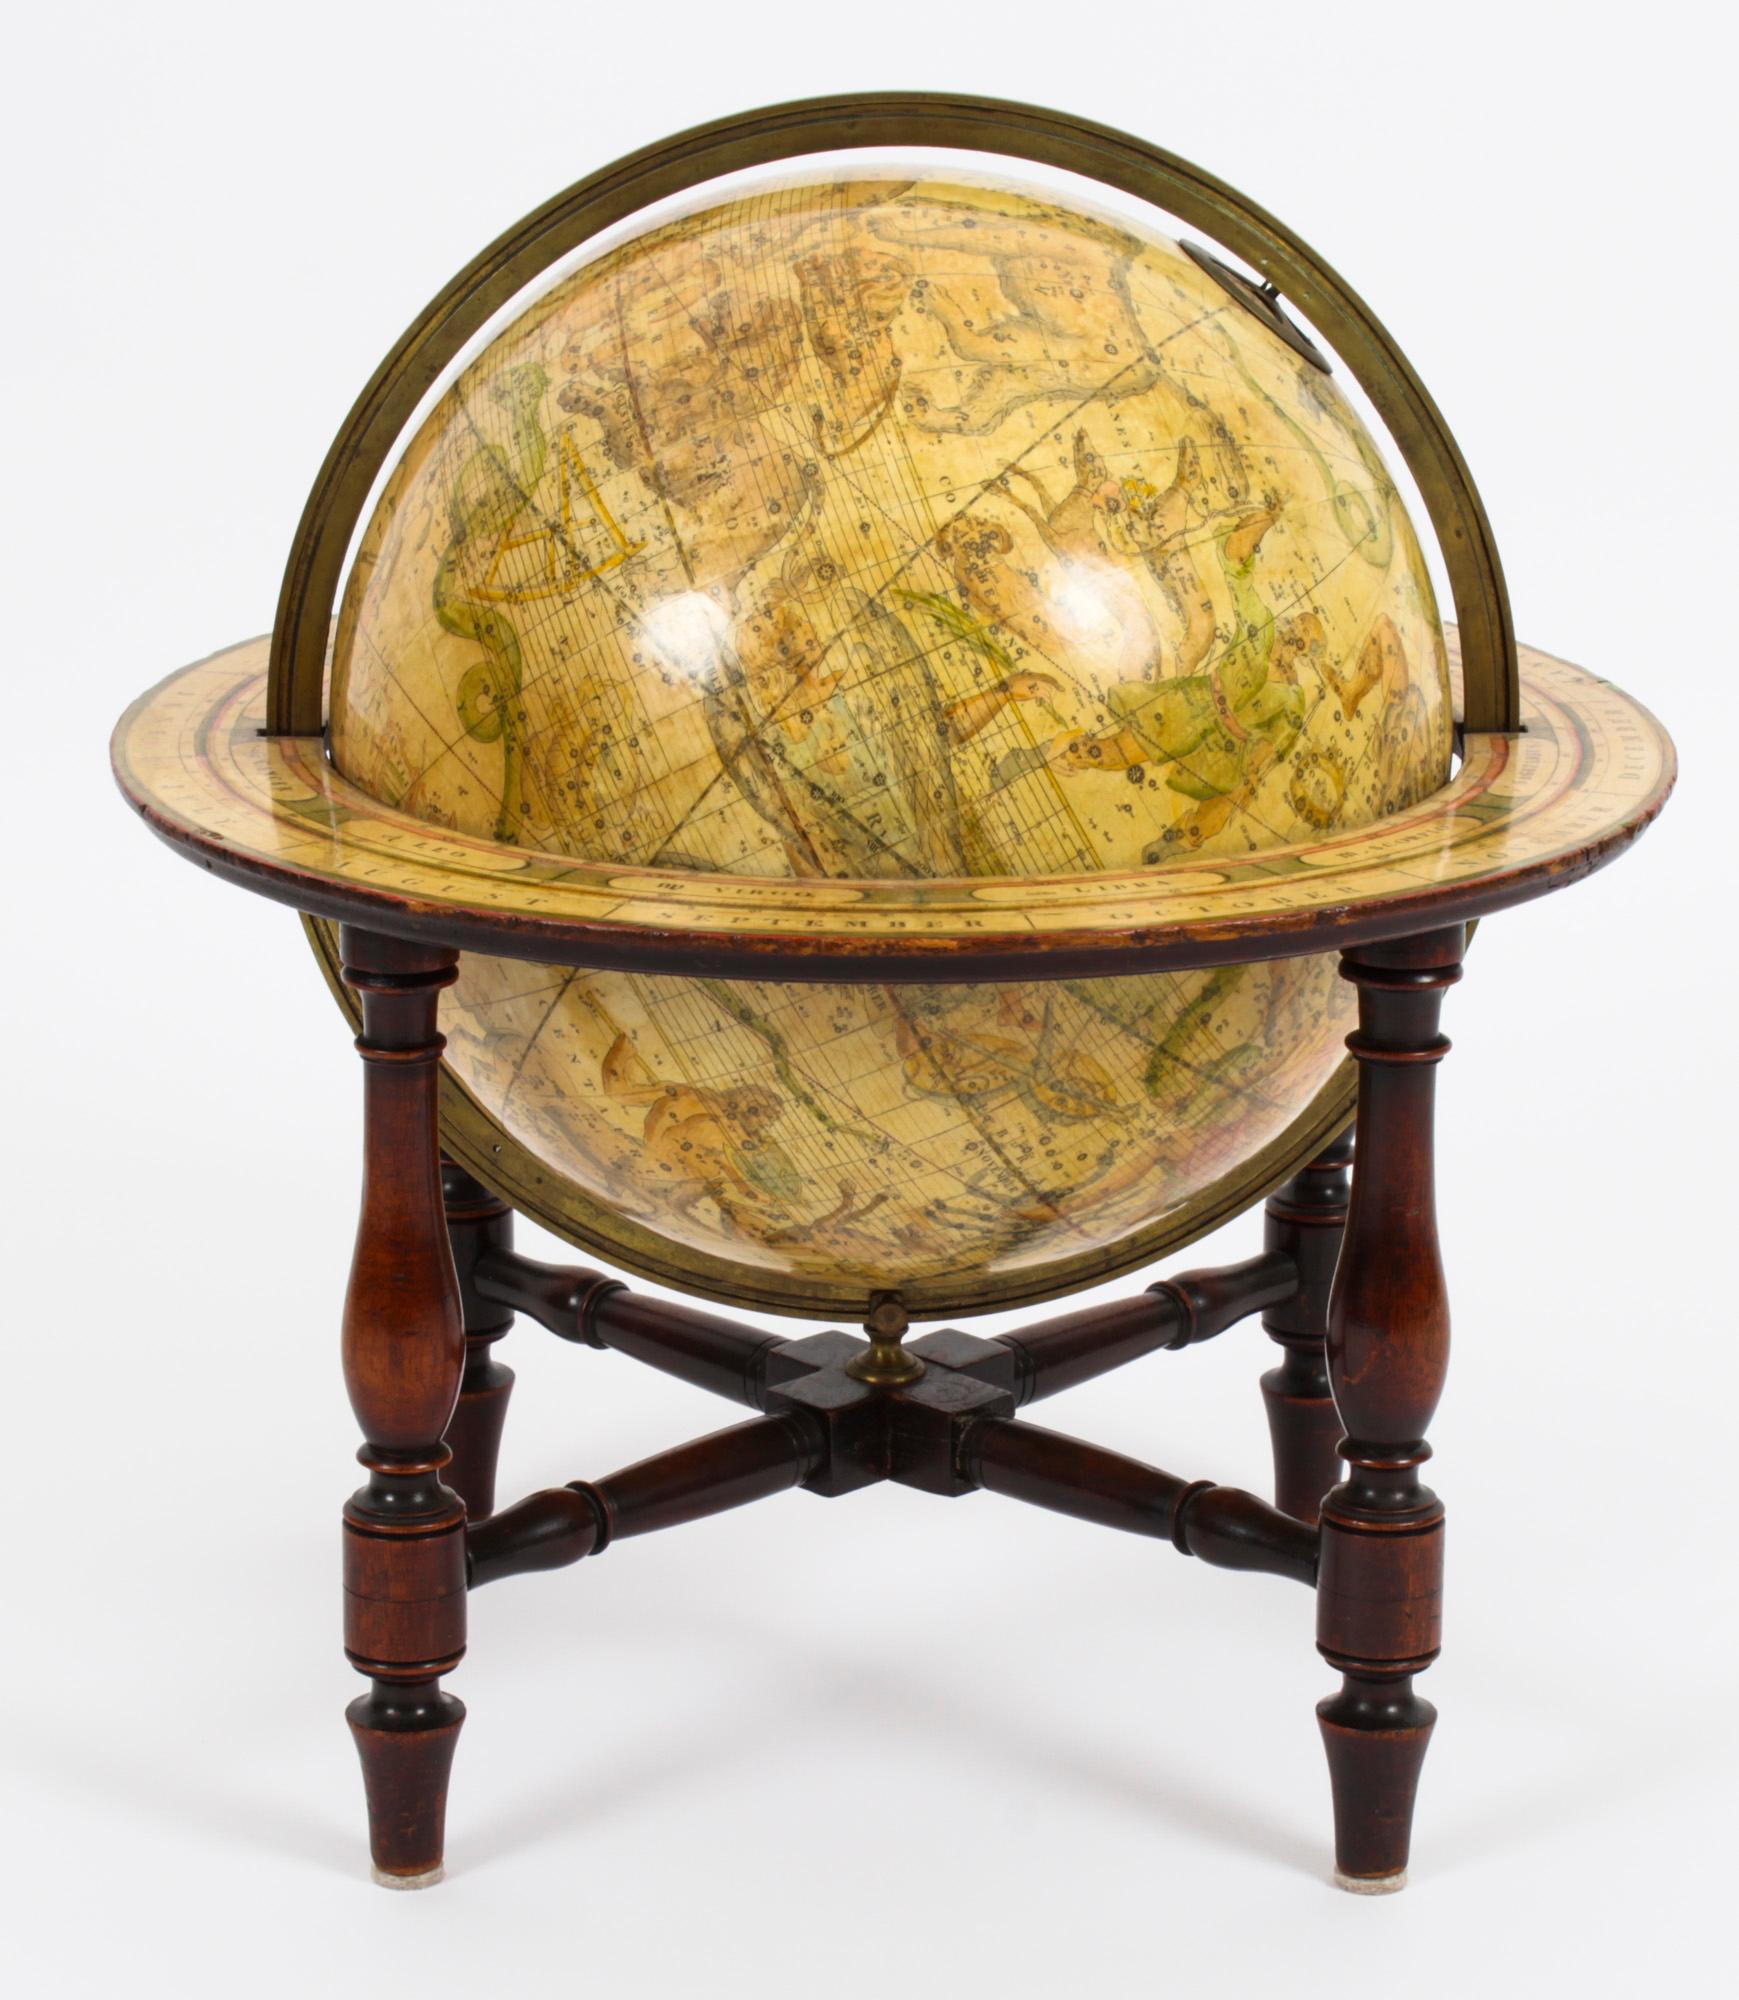 A fine antique 12inch Cary's New Celestial library table globe on stand, dated 1810.
 
Bearing the following inscription:
 
Cary's Celestial globe
on which are correctly laid down upwards of 3500 Stars.
Selected from the most accurate